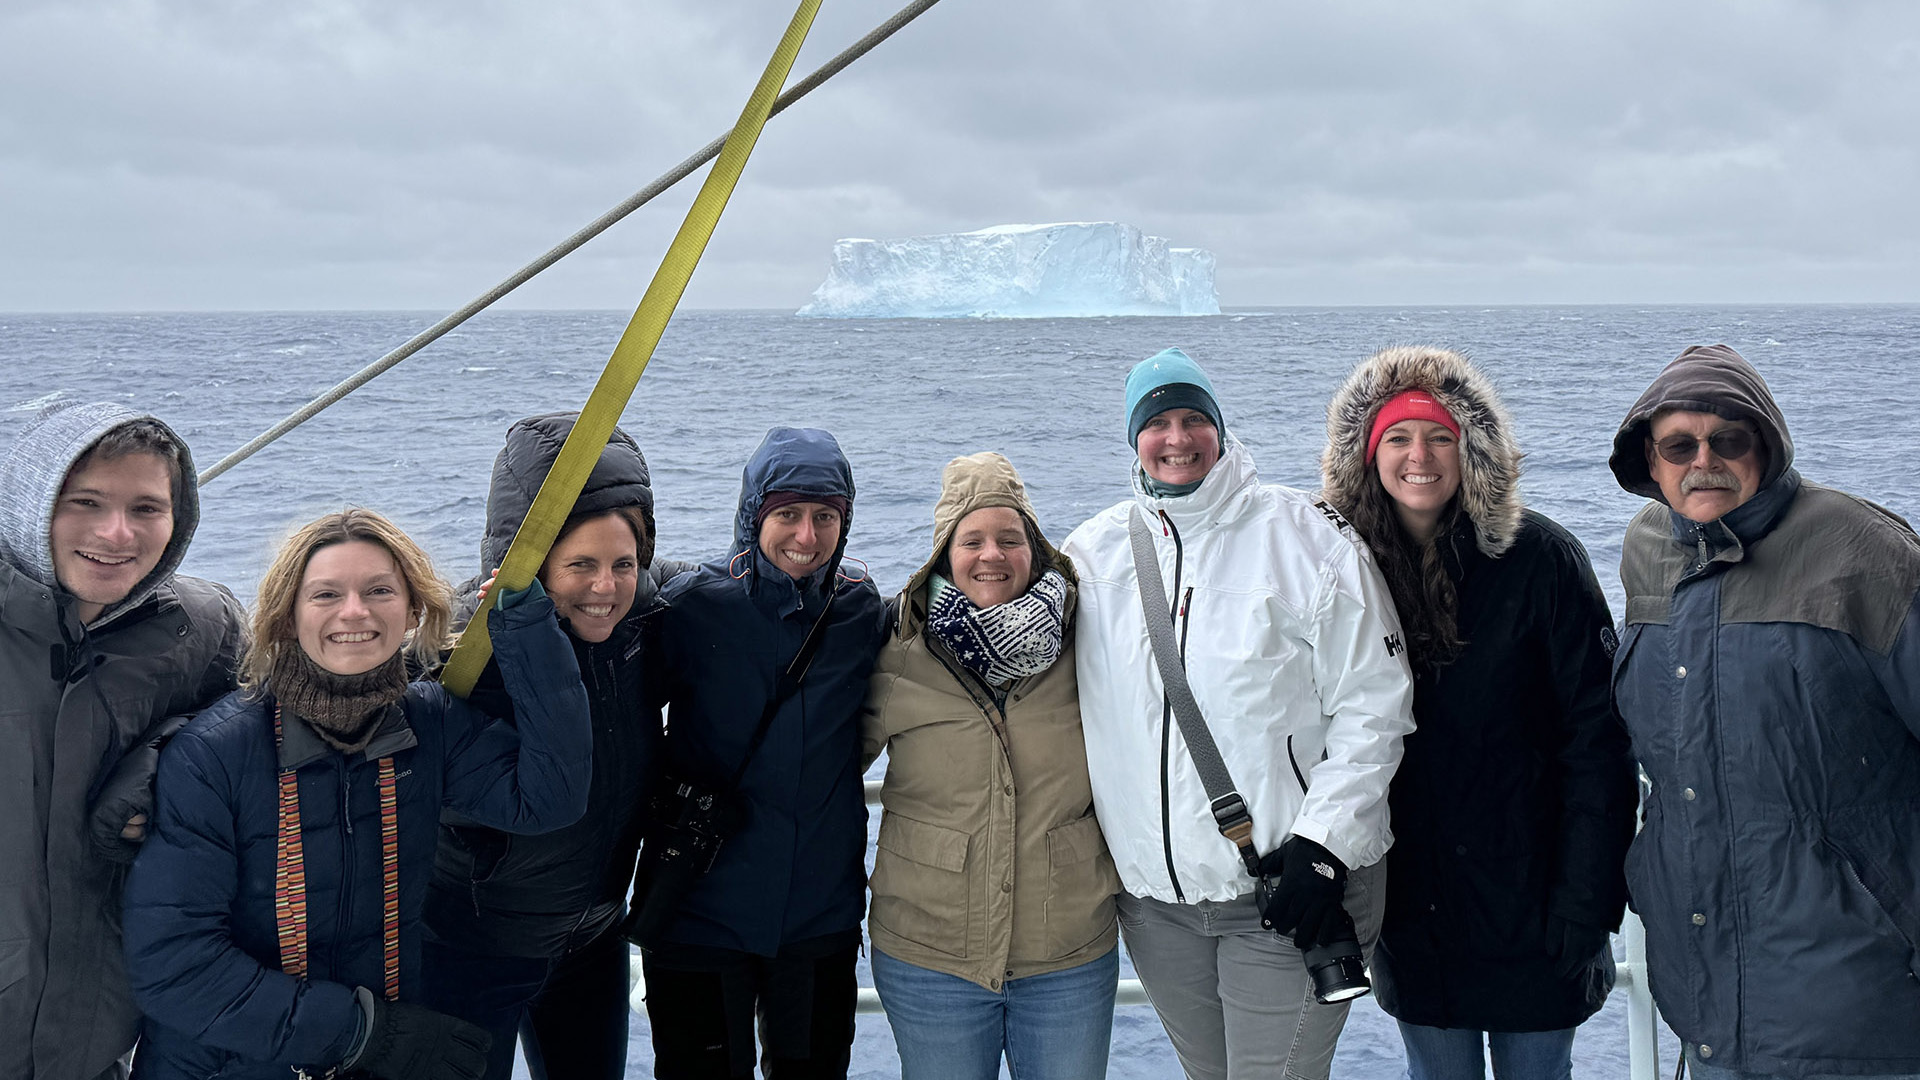 Everyone wanted to pose with the photogenic icebergs!